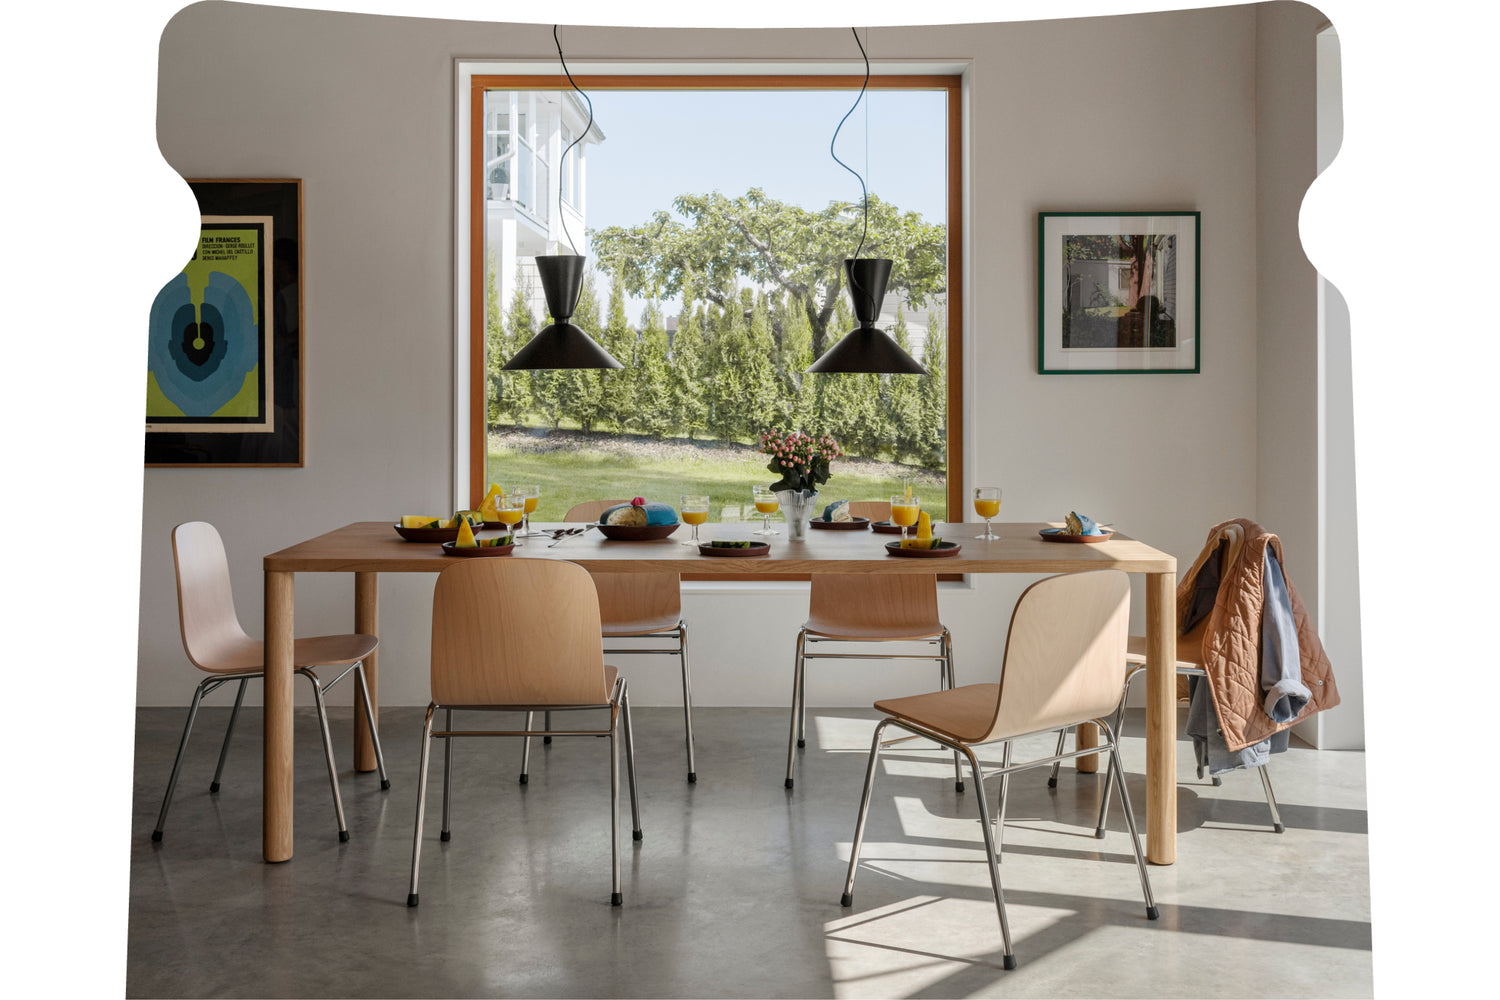 Hem - dining room scene featuring Log Table, Touchwood Chairs, and Alphabeta Pendant Lights.